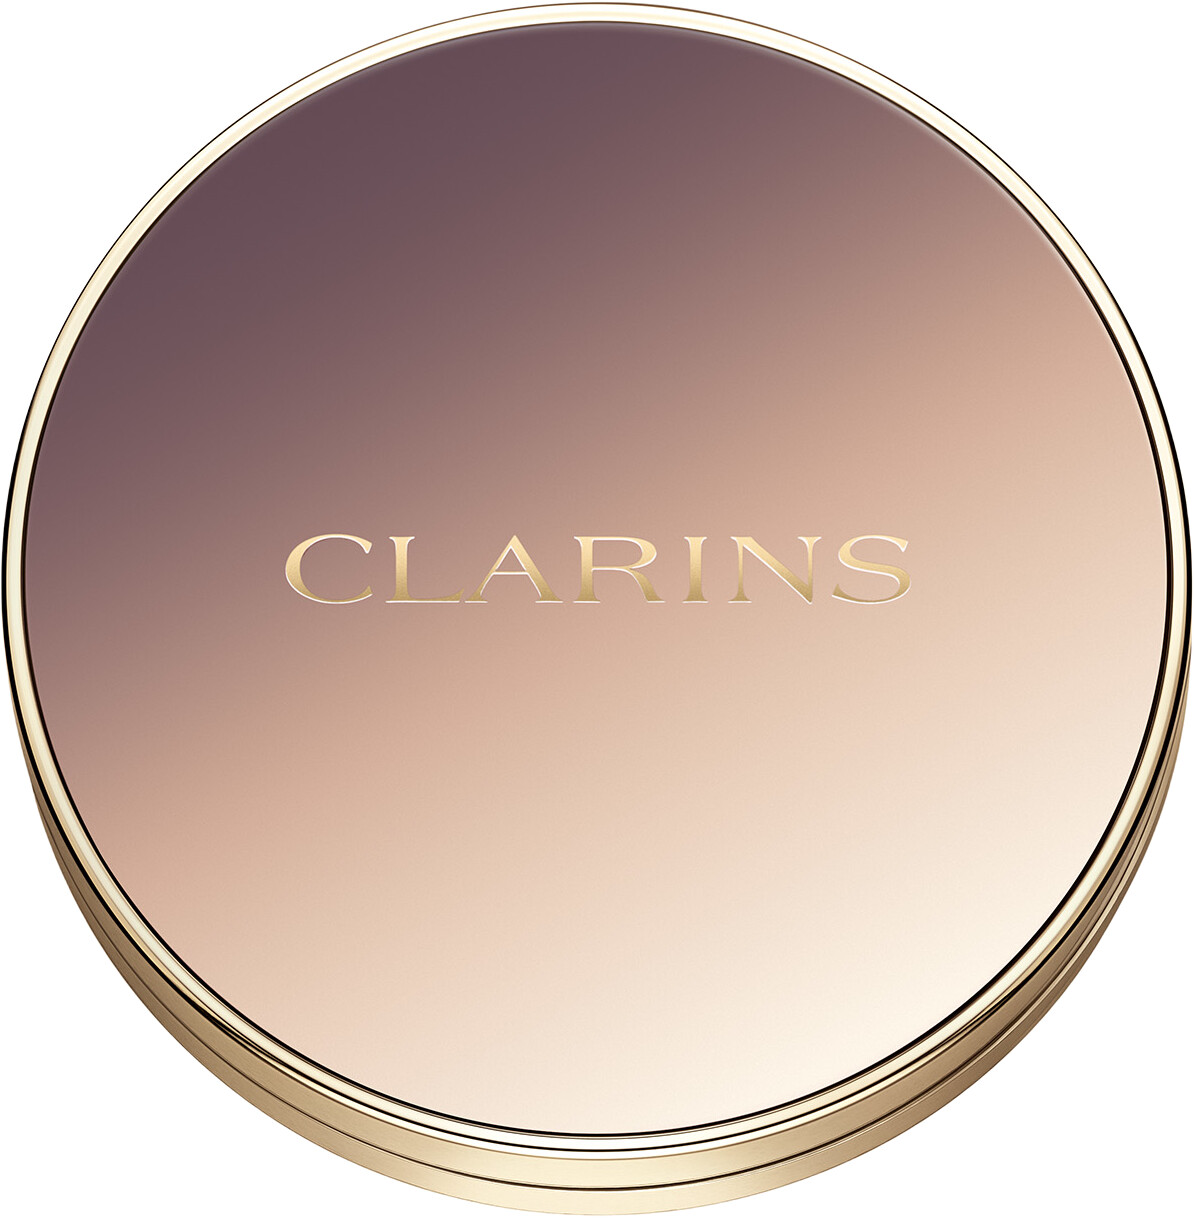 Clarins Ombre 4 Colour Eyeshadow Palette 4.2g 08 - Amber Gradation